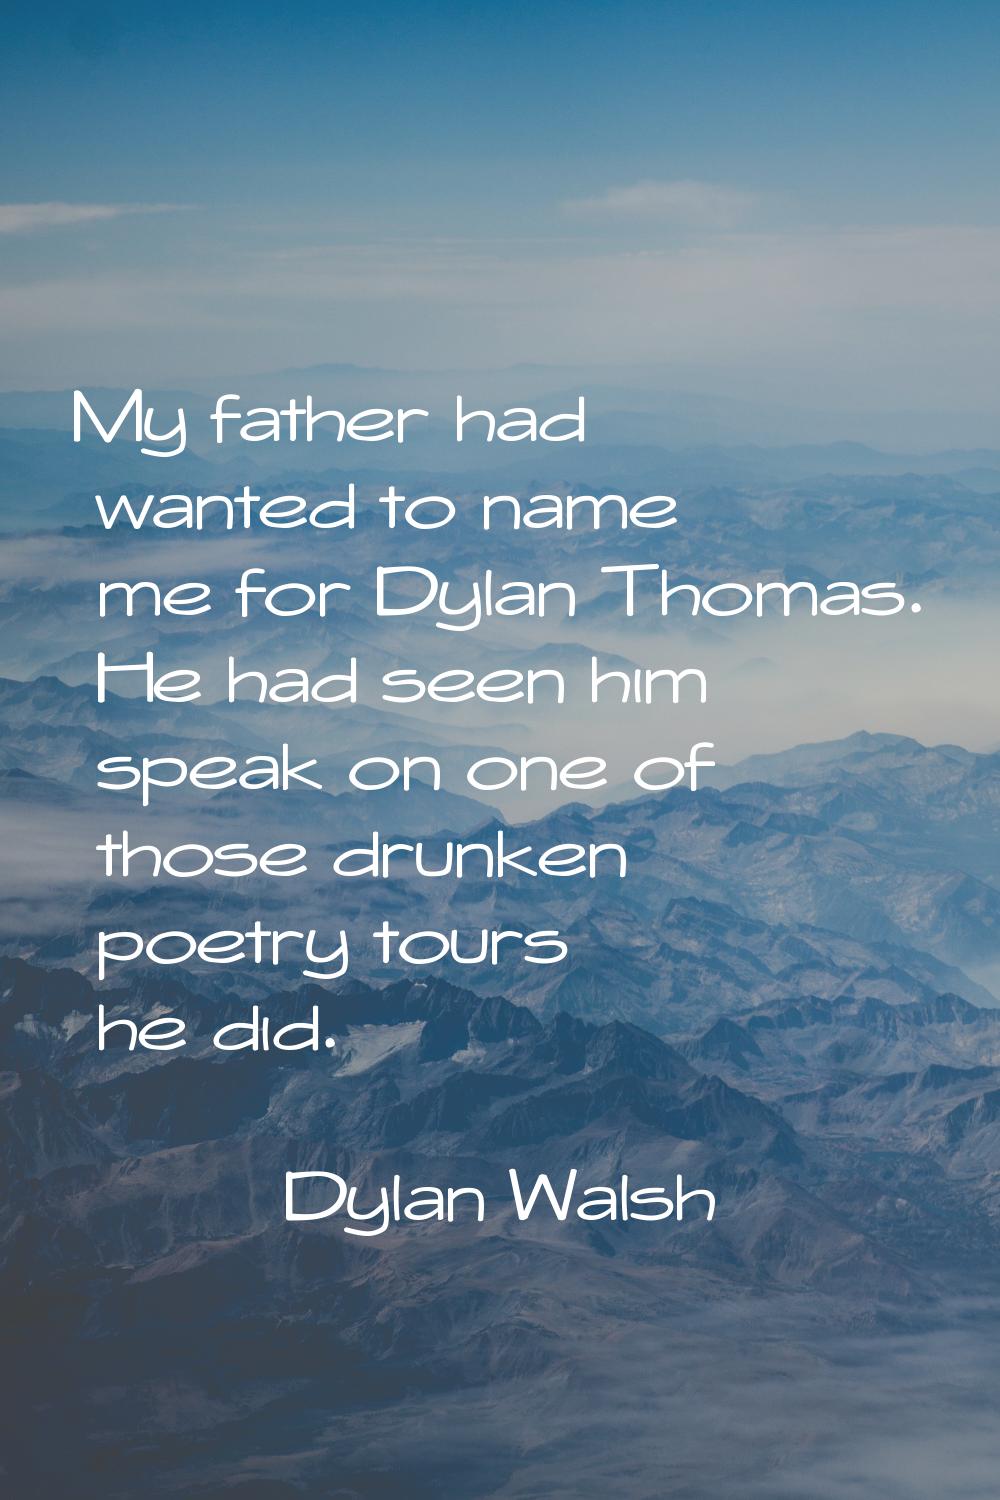 My father had wanted to name me for Dylan Thomas. He had seen him speak on one of those drunken poe